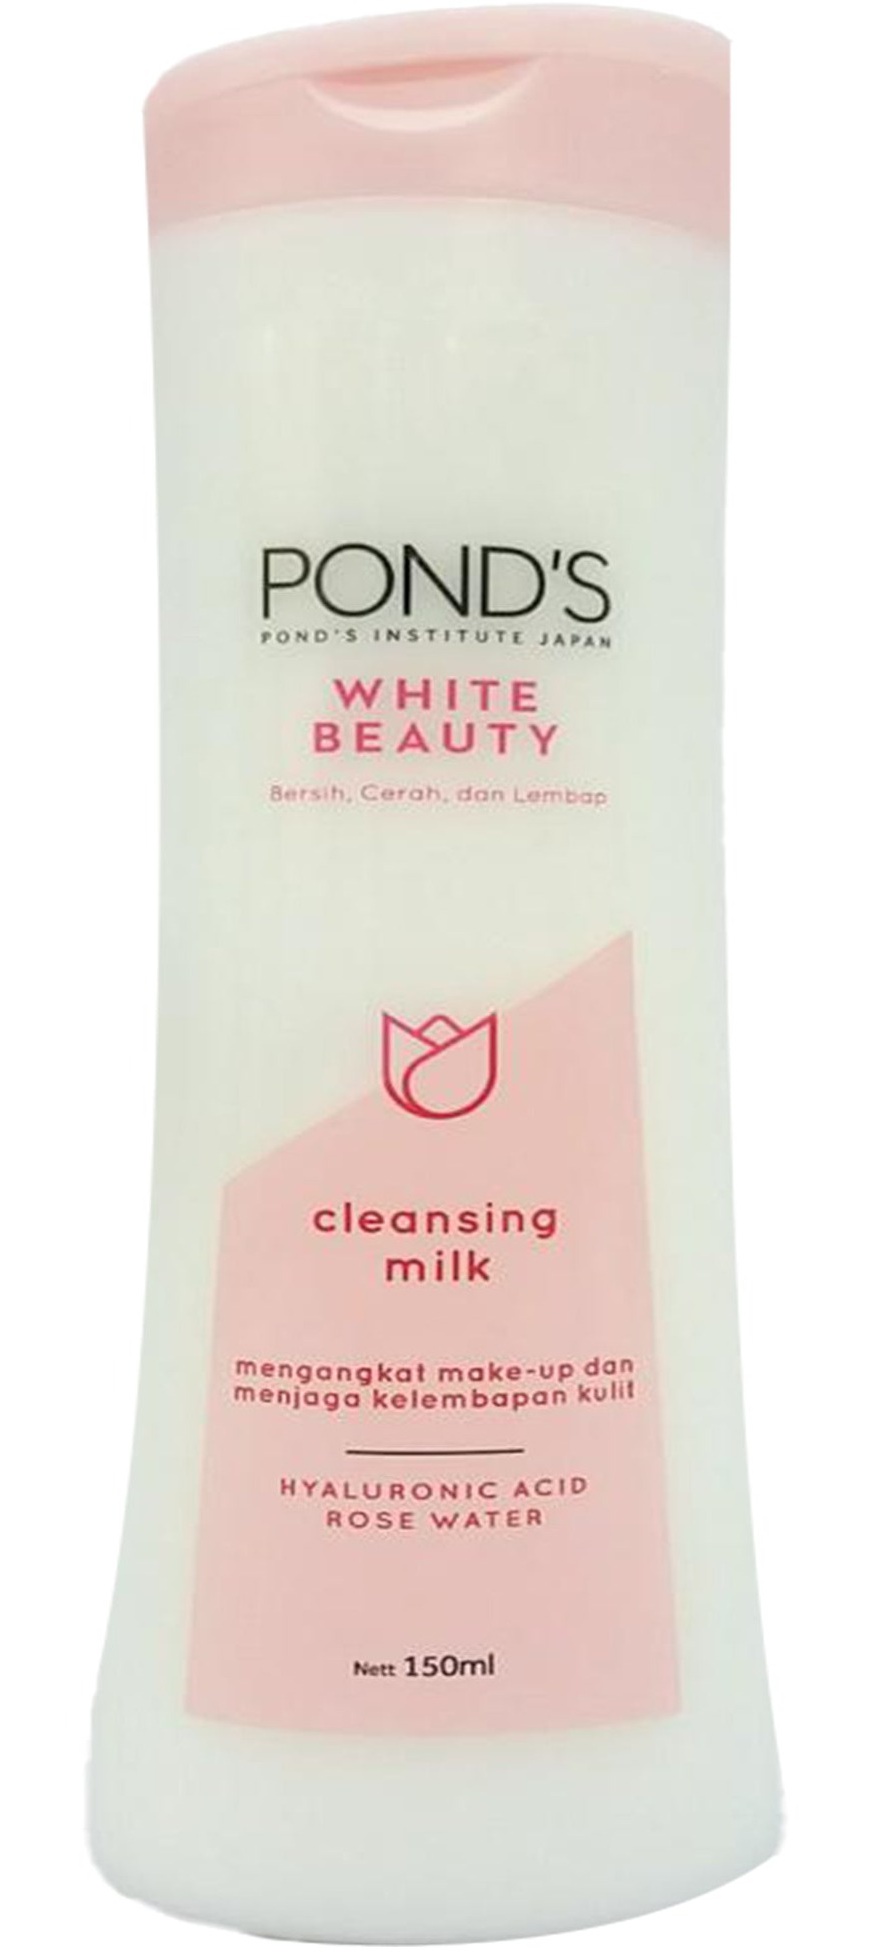 Pond's Bright Beauty Cleansing Milk